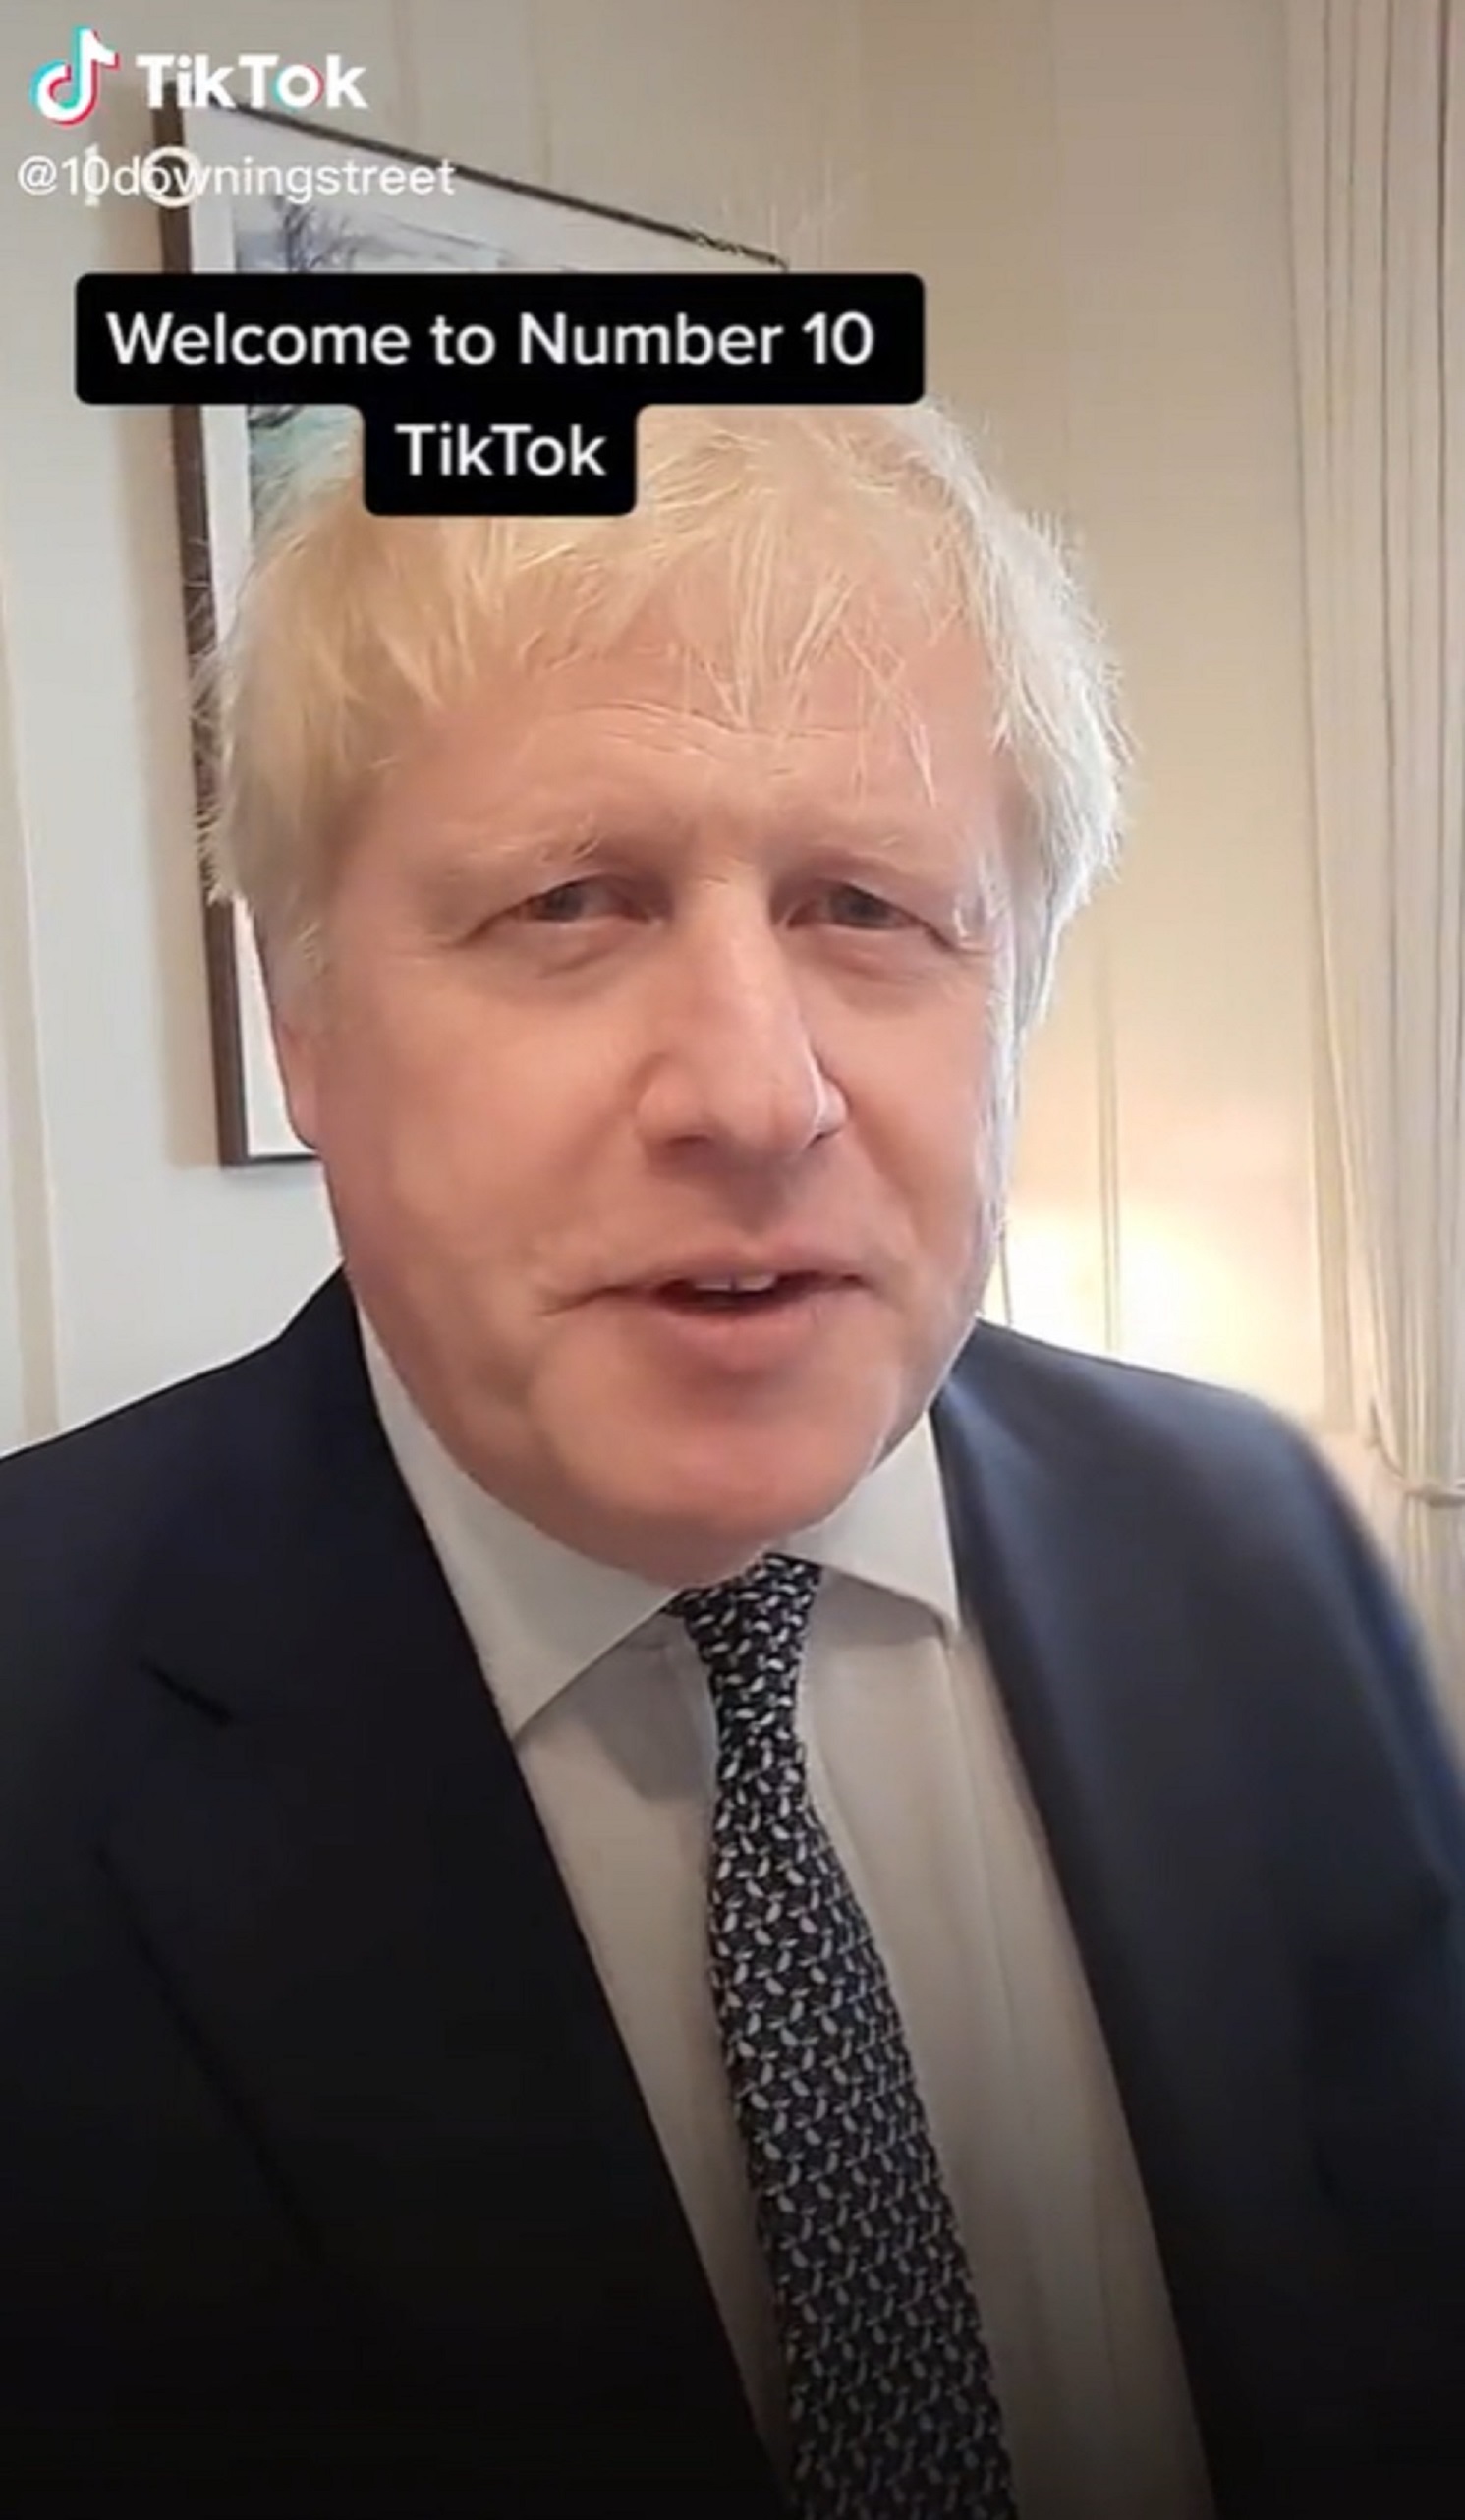 Boris Johnson appeared in the first video from 10downingstreet on Tuesday 10 May 